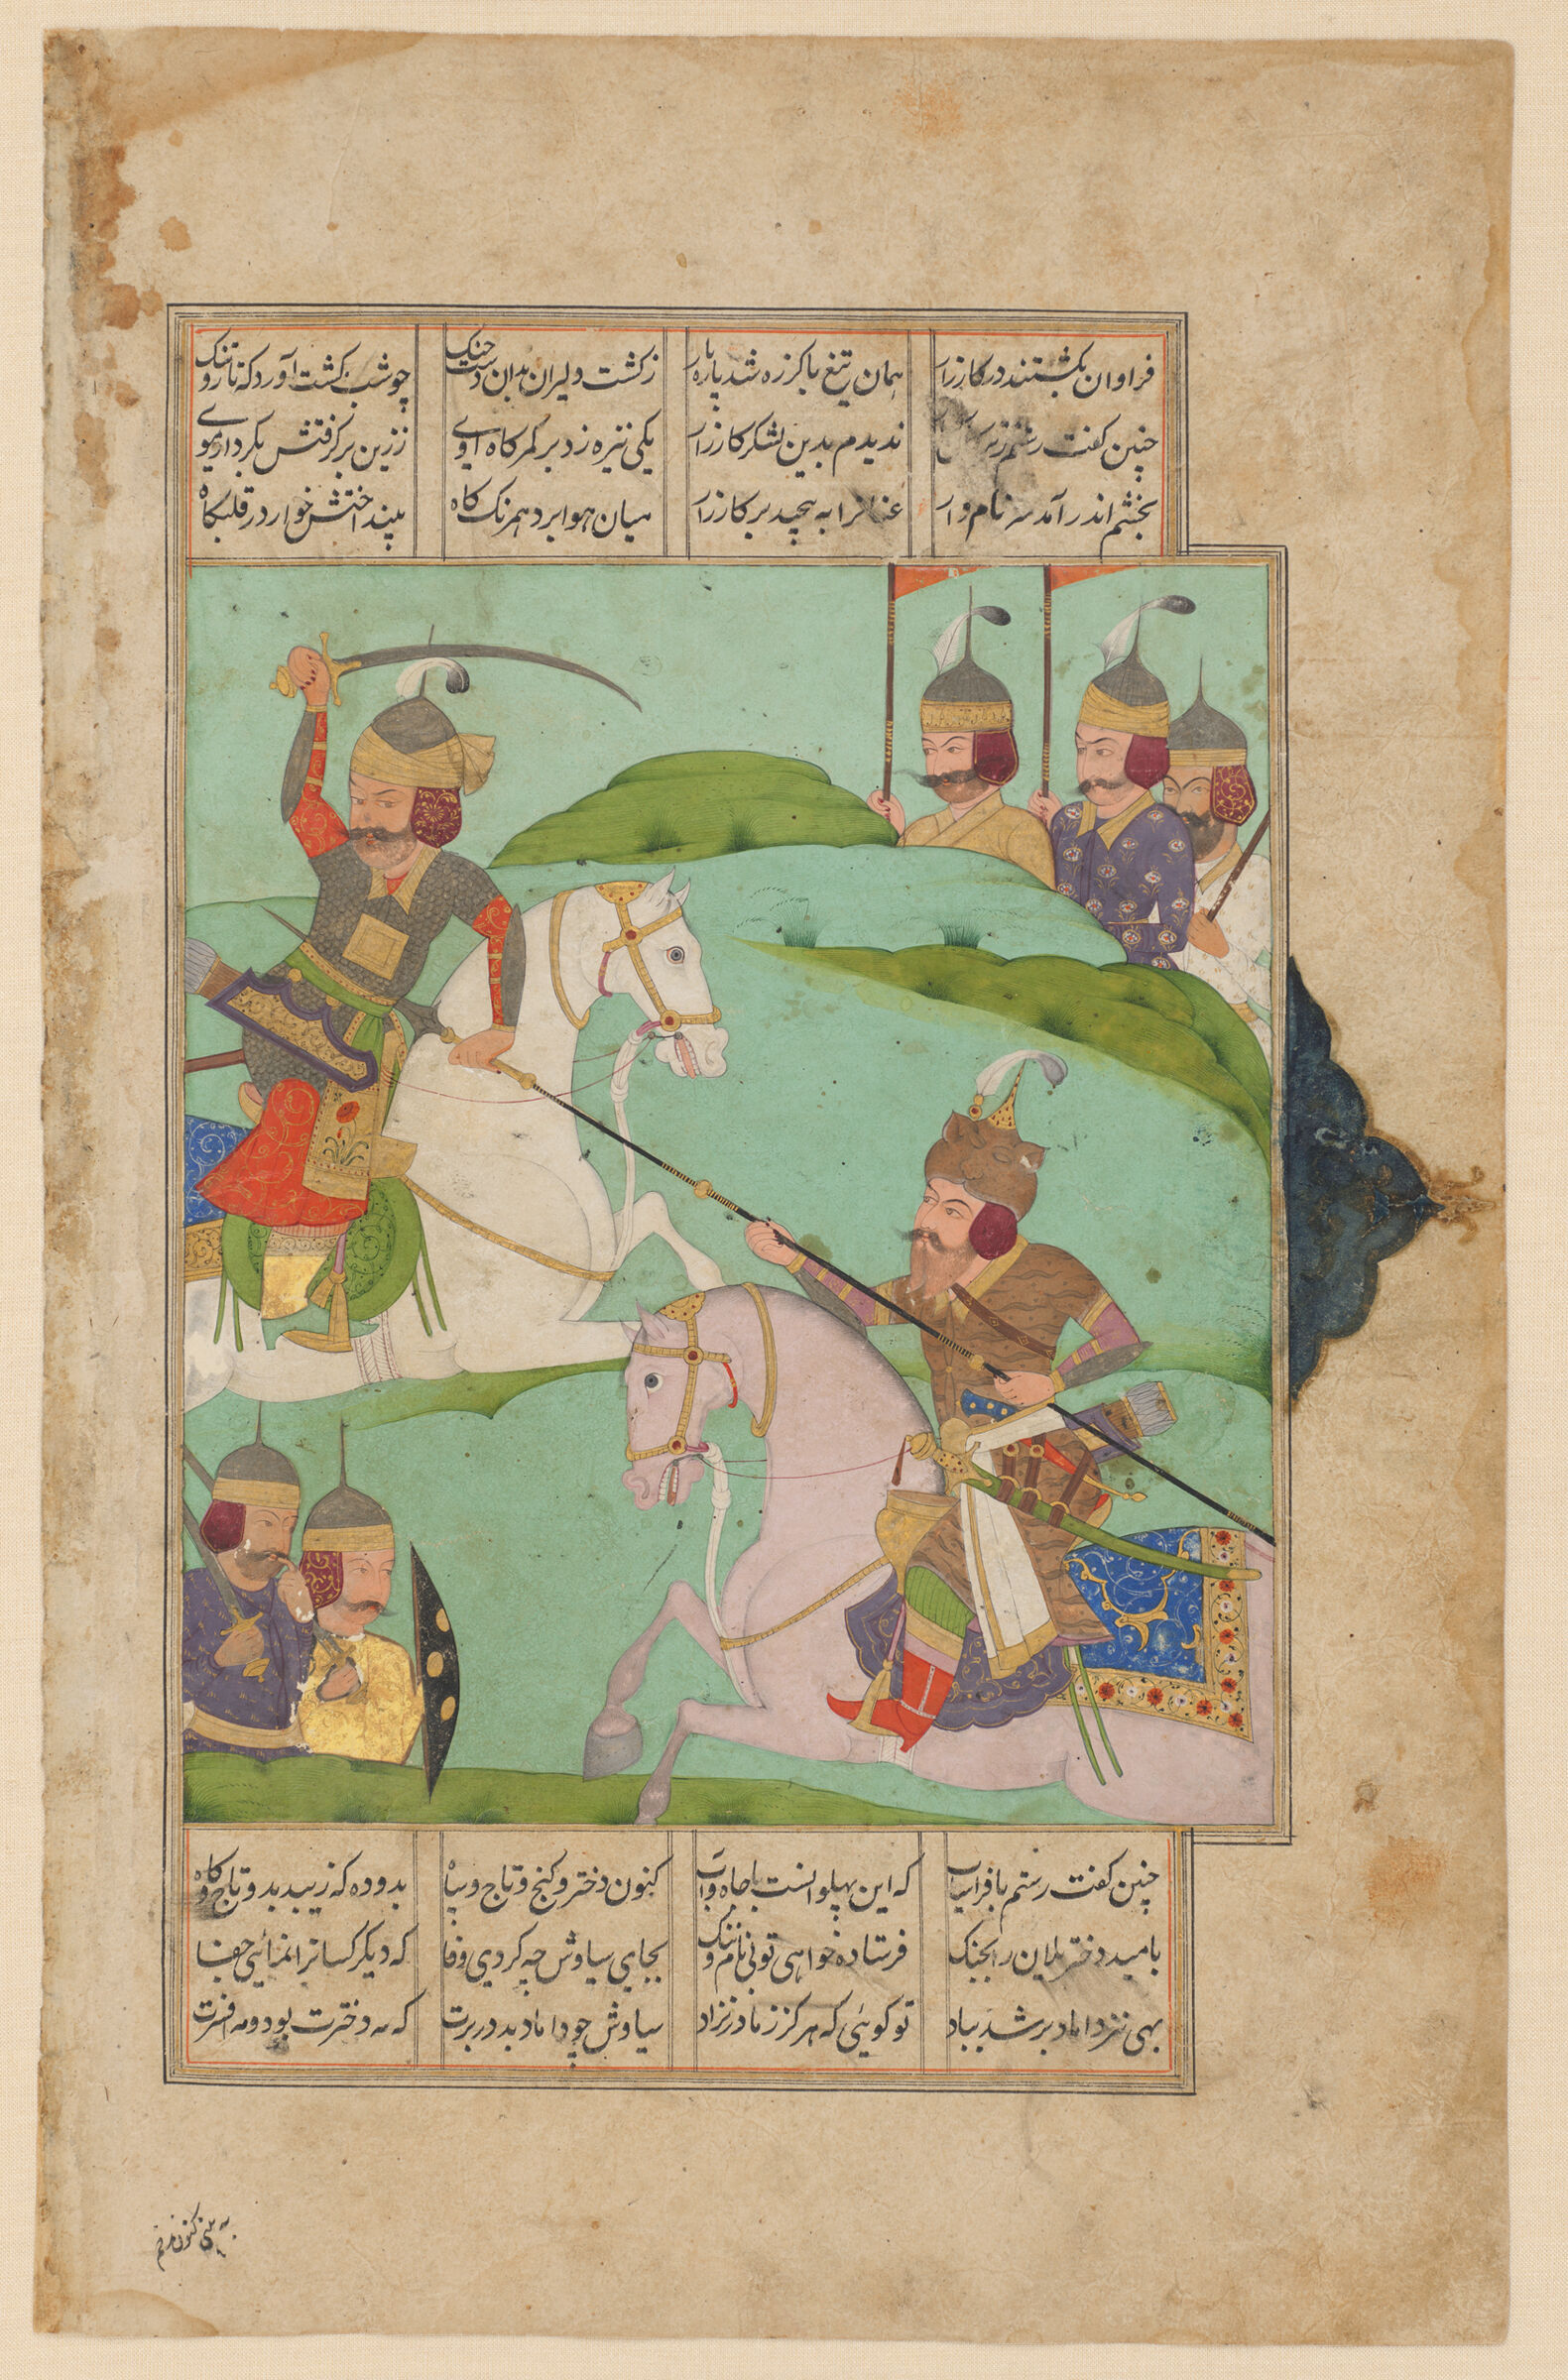 Rustam Spears Pilsam (Text Recto; Painting Verso Of Folio 142), Illustrated Folio From A Manuscript Of The Shahnama By Firdawsi